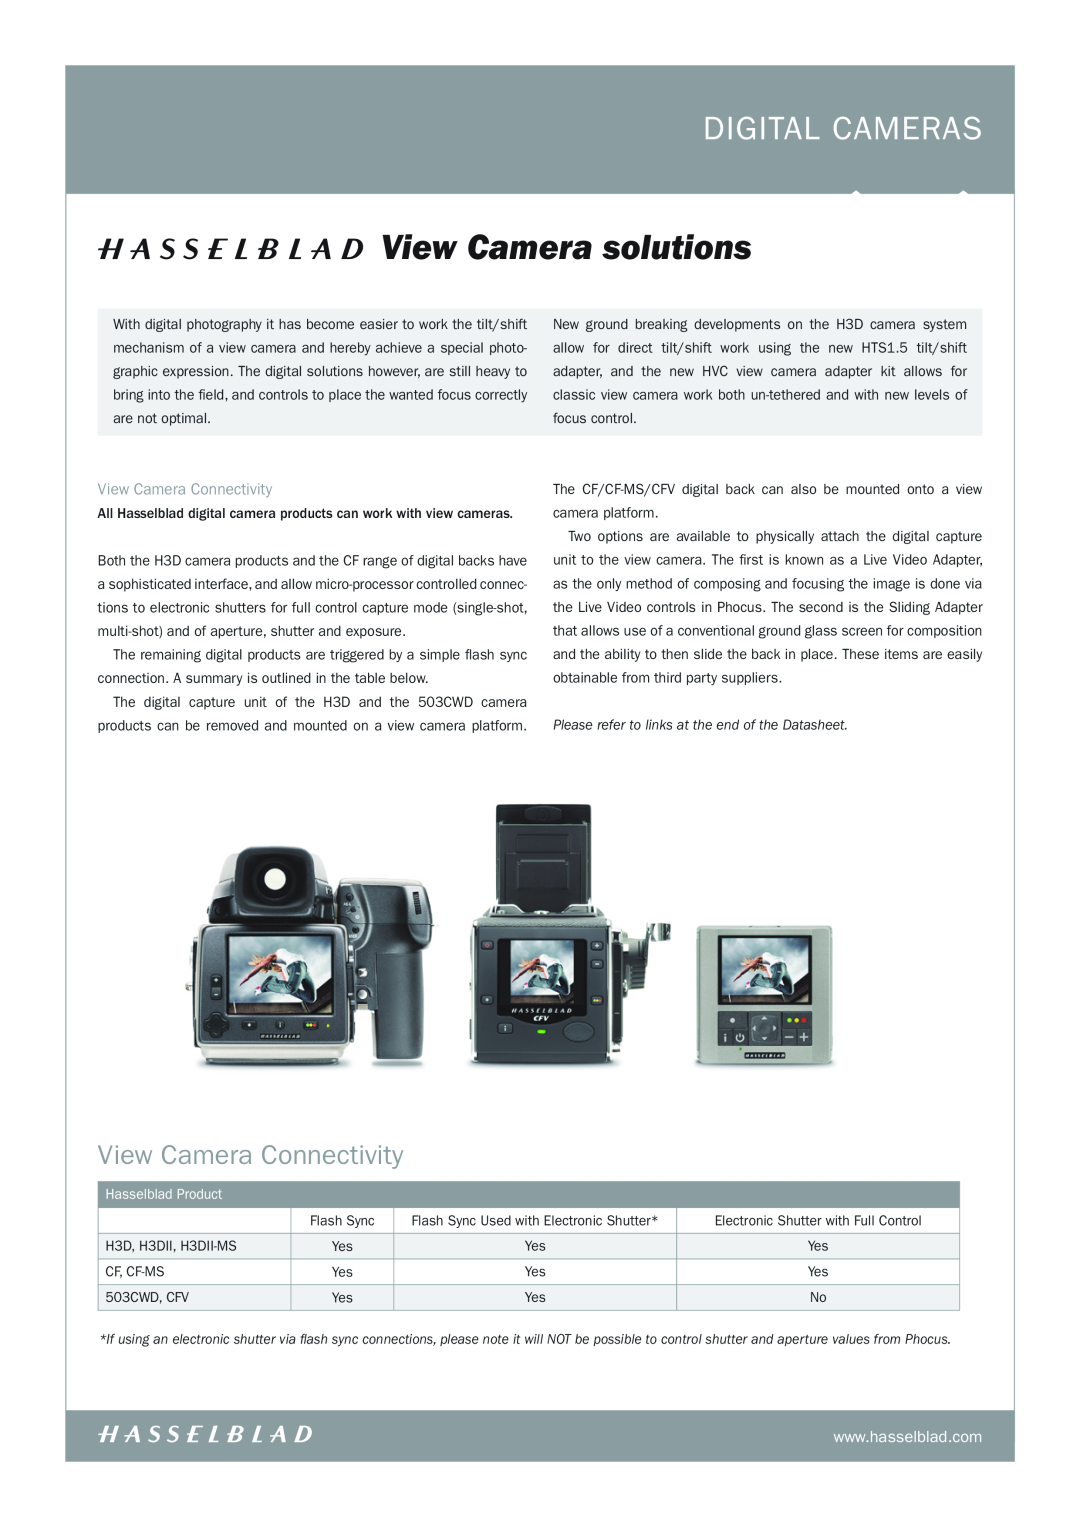 Hasselblad H3dii-MS, H3DII, CF manual View Camera solutions, digital CAMERAS, View Camera Connectivity, Hasselblad Product 